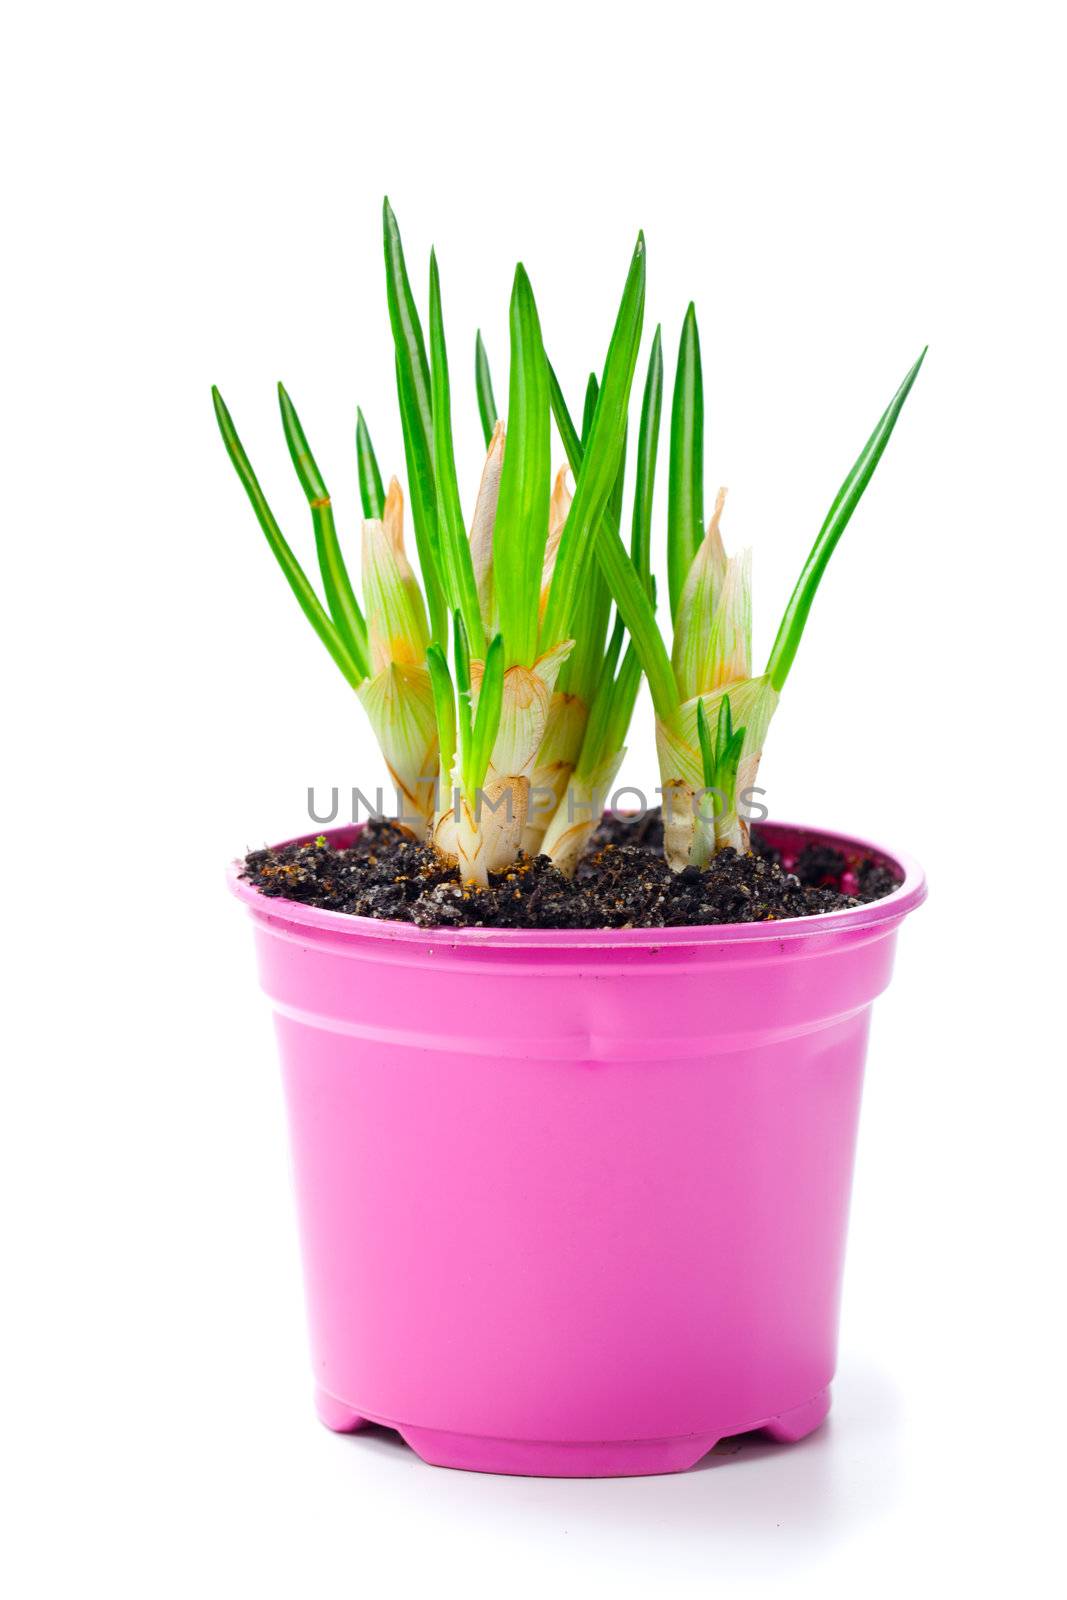 sprout of flower bulbs in pot, in early spring by motorolka